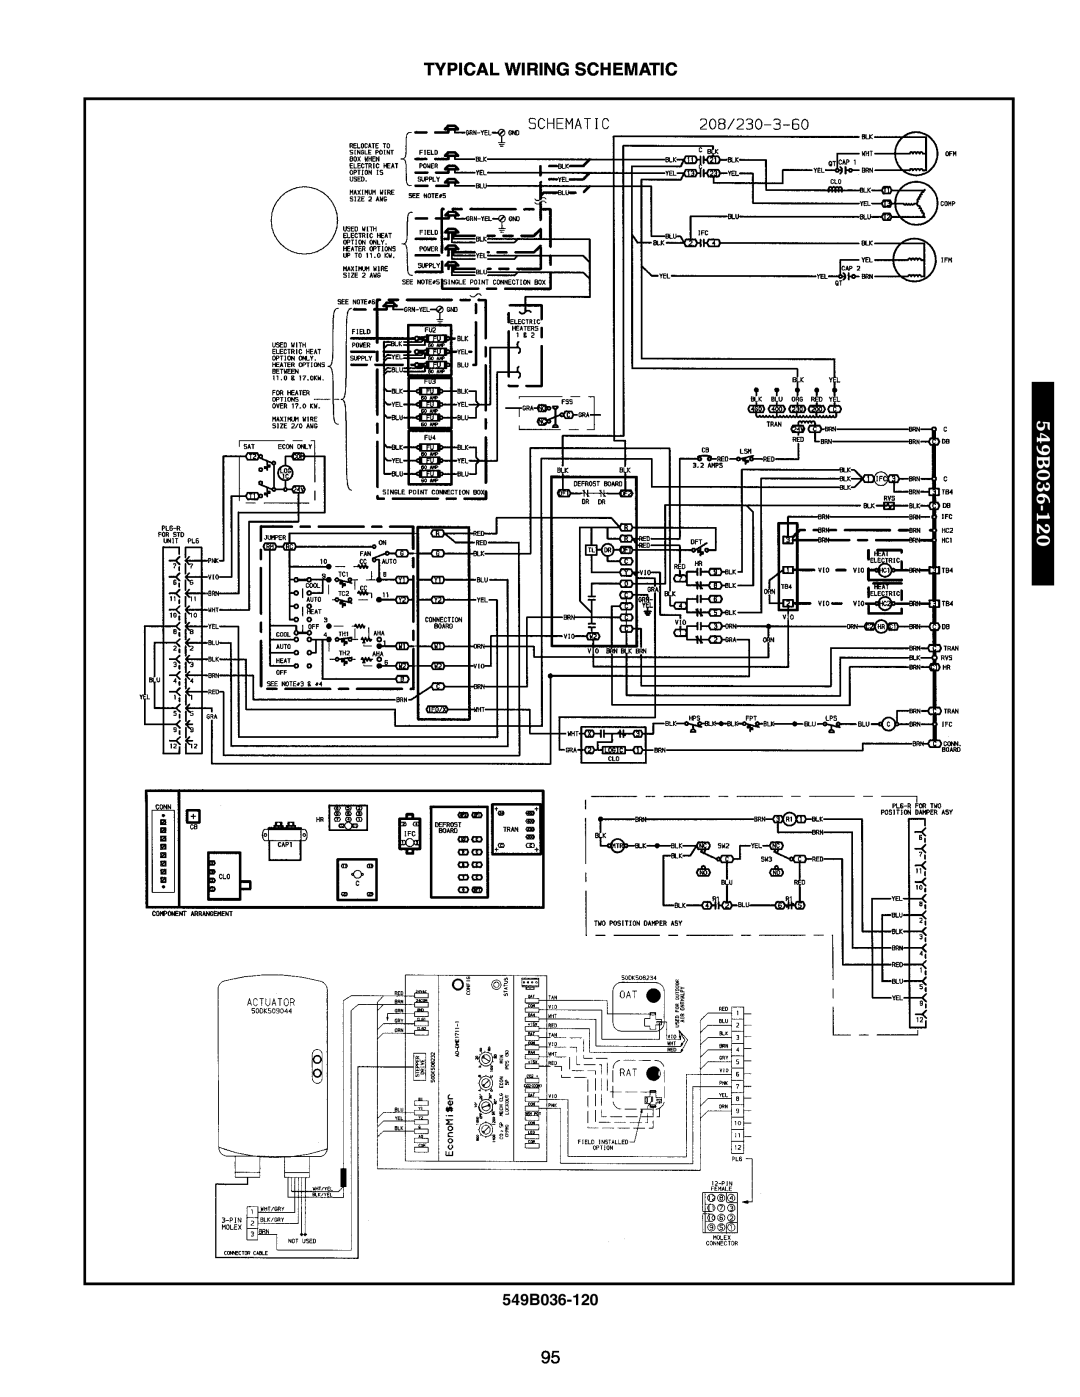 Bryant 542J, 548F manual Typical Wiring Schematic, 549B036-120 